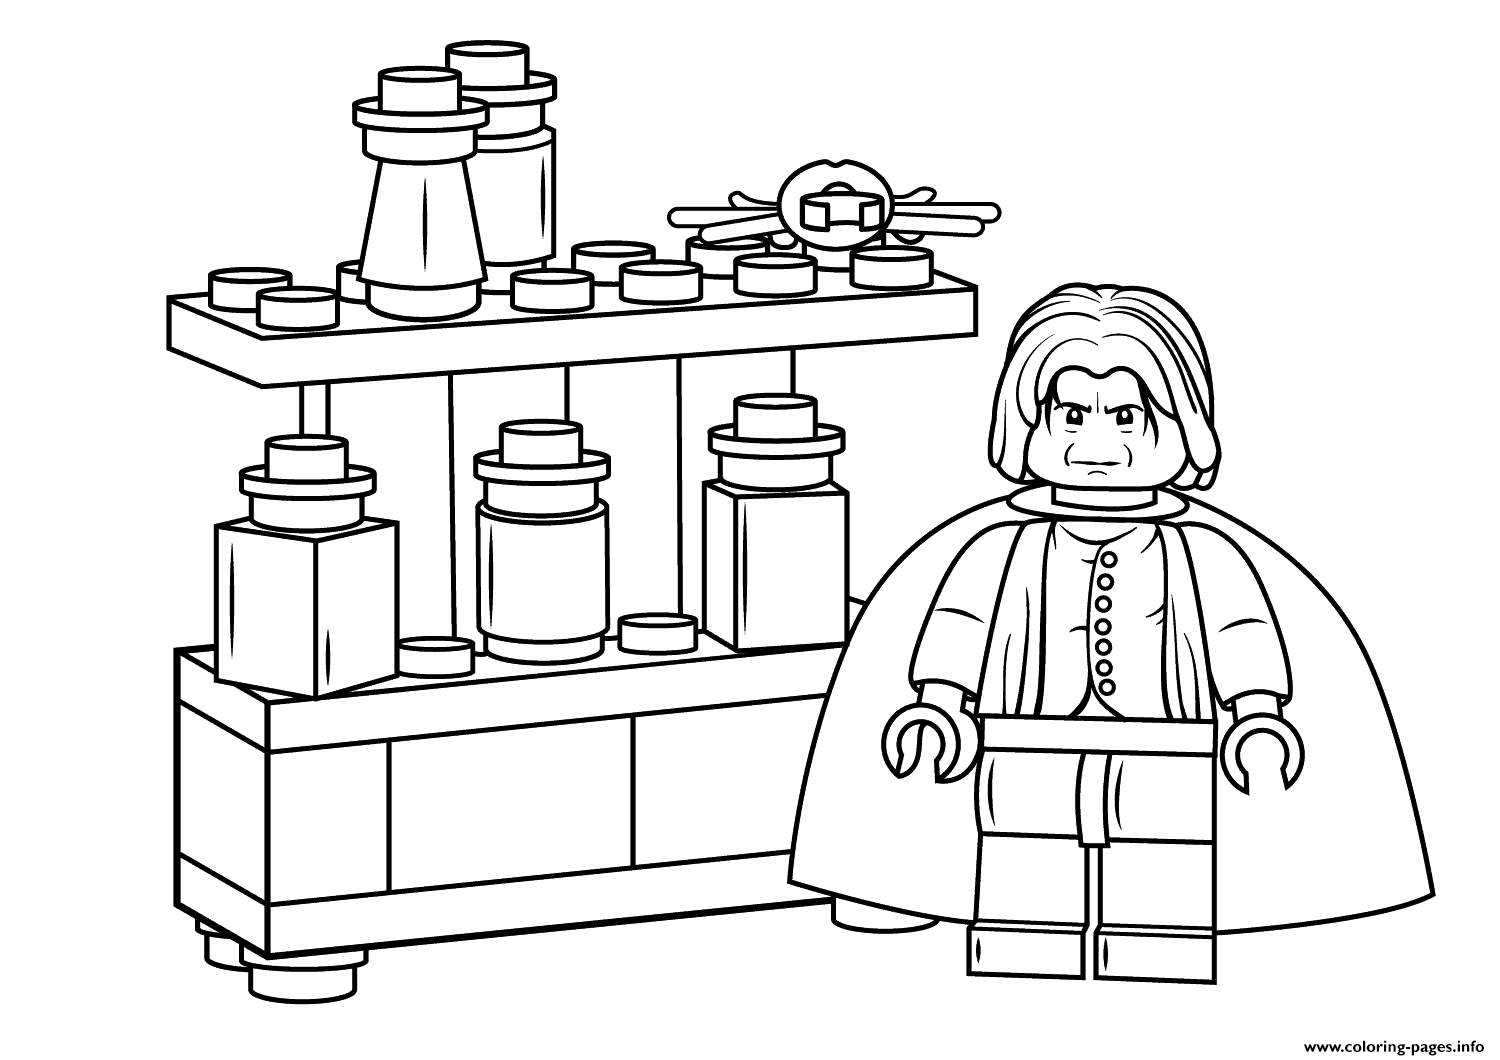 Lego severus snape harry potter coloring page printable